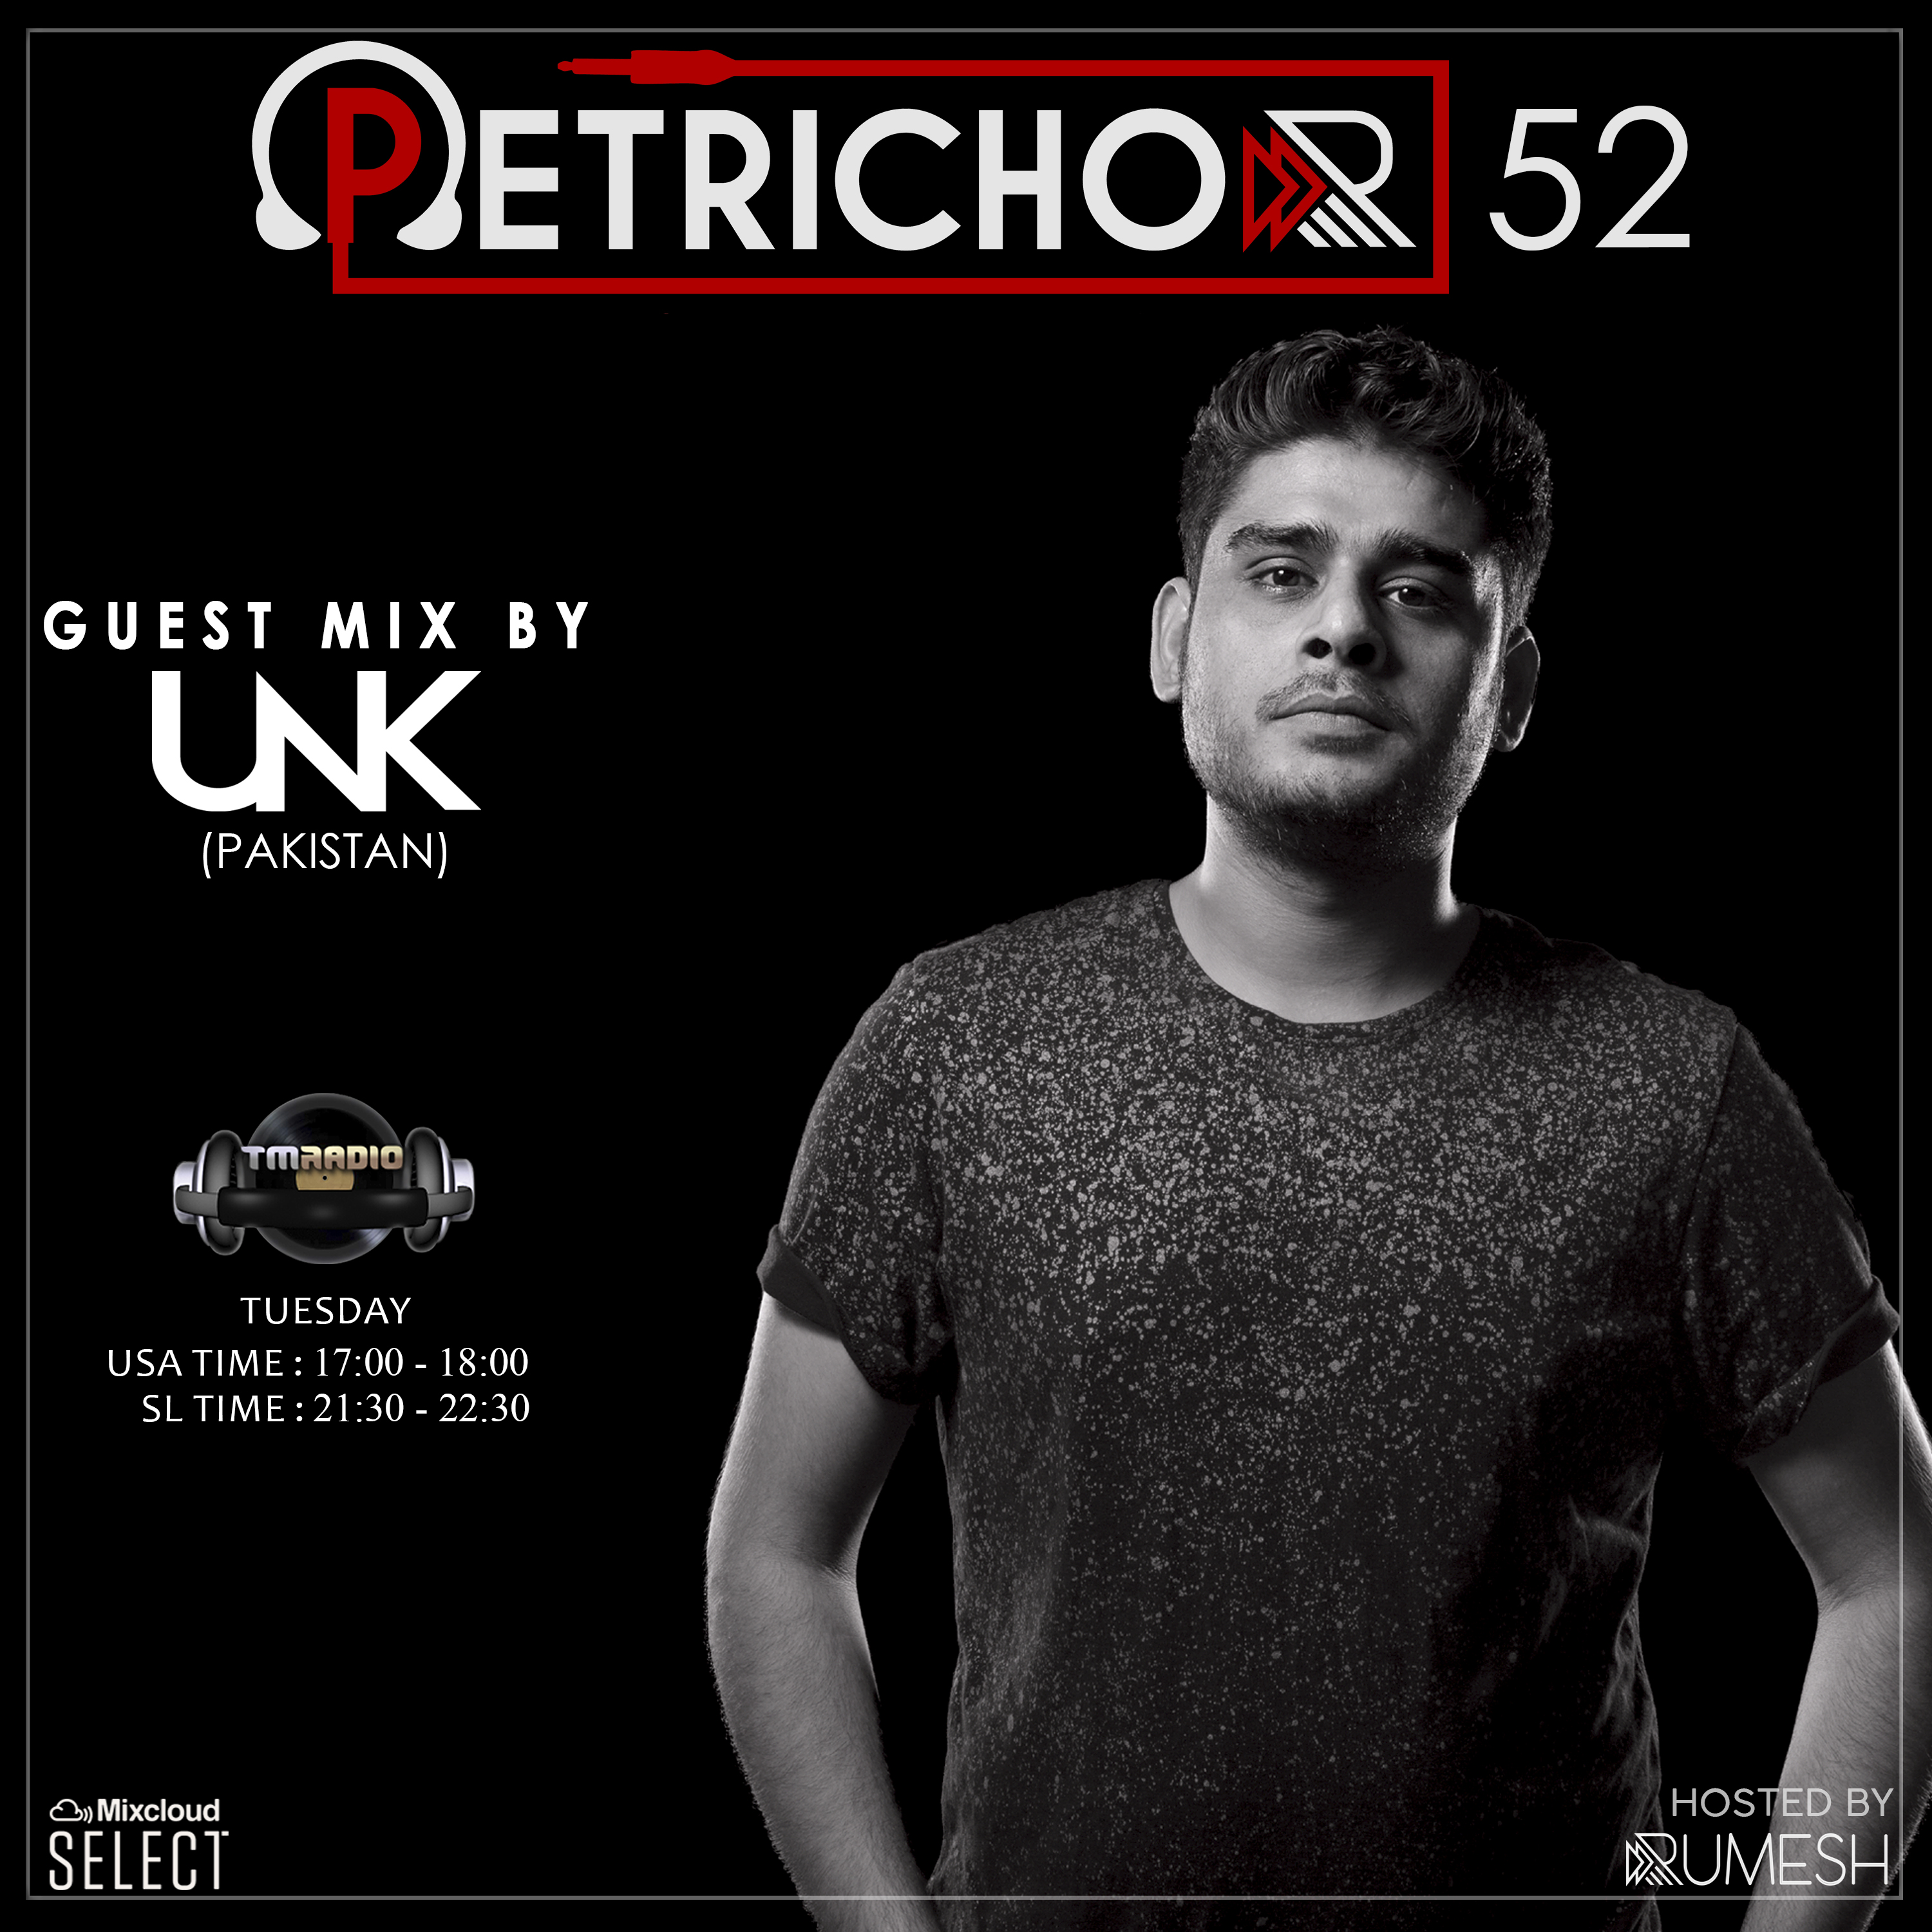 Petrichor 52 guest mix by UNK (Pakistan) (from November 5th, 2019)